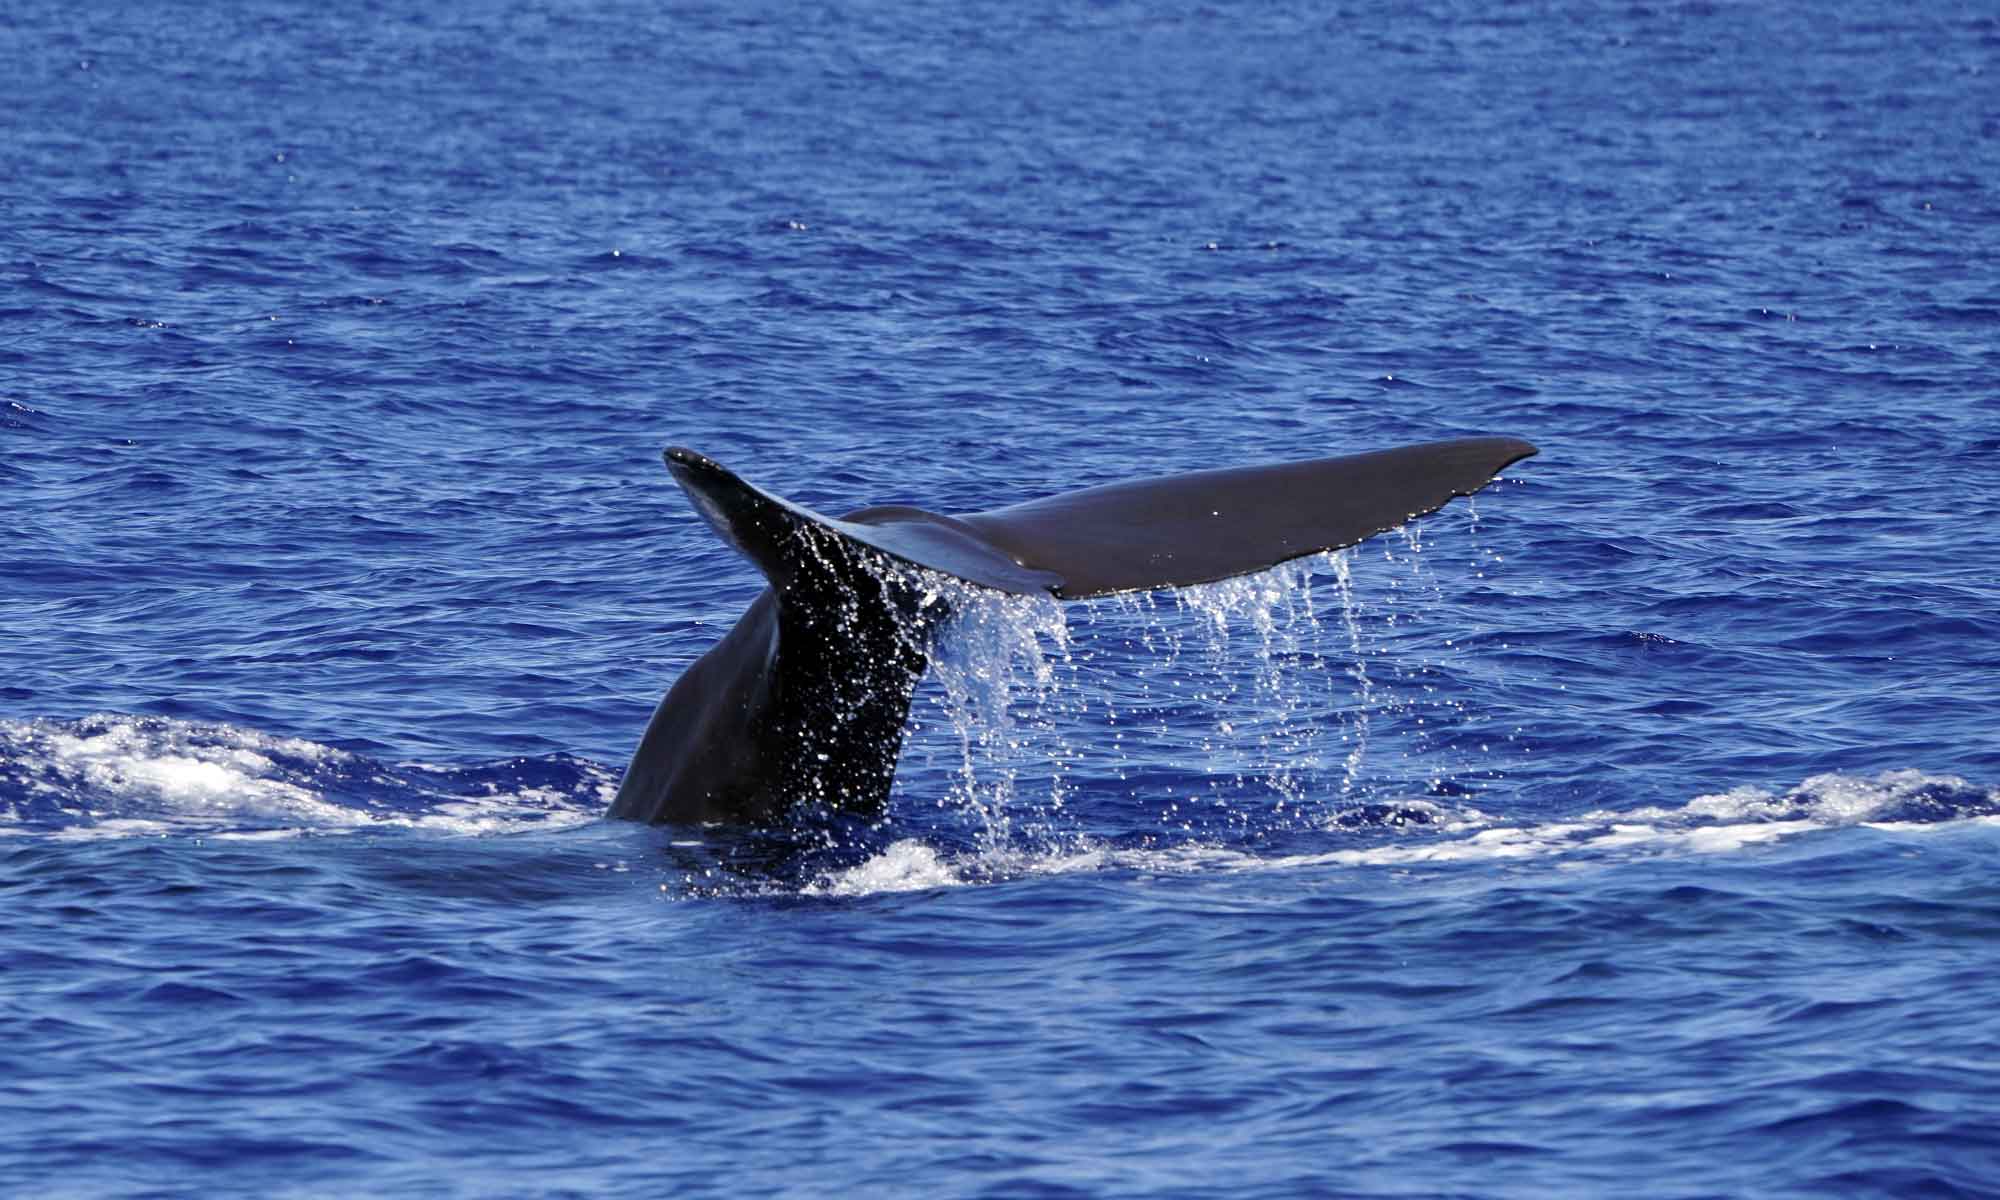 The Sperm whales are a migratory species that is often seen around the island of Madeira.